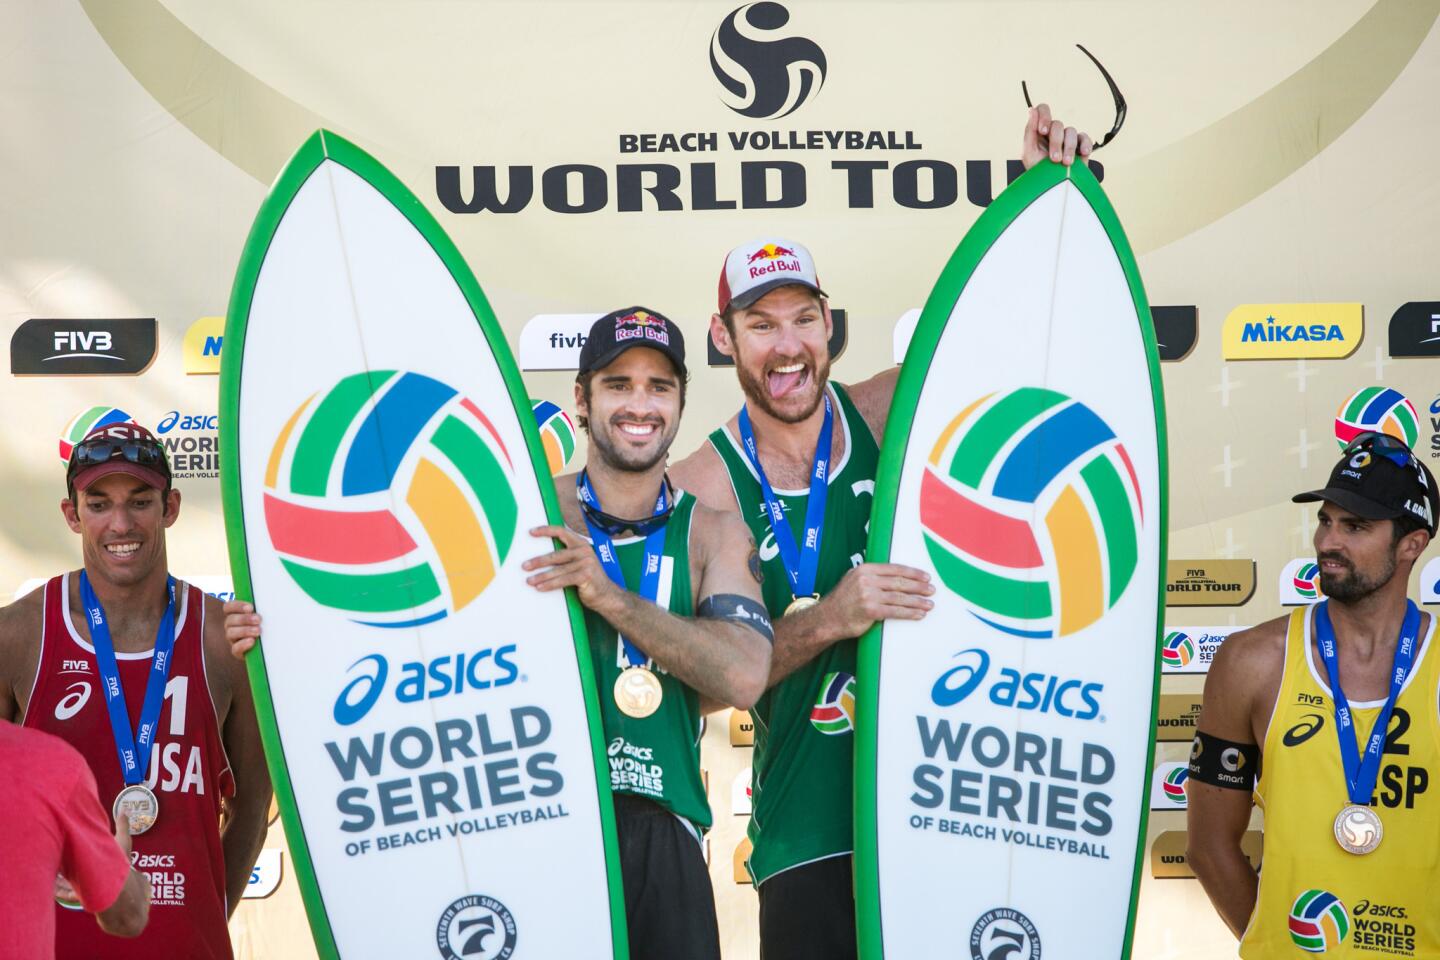 Bruno Schmidt, left, and Alison Cerutti celebrate atop the podium after winning the ASICS World Series of Beach Volleyball on Sunday in Long Beach.